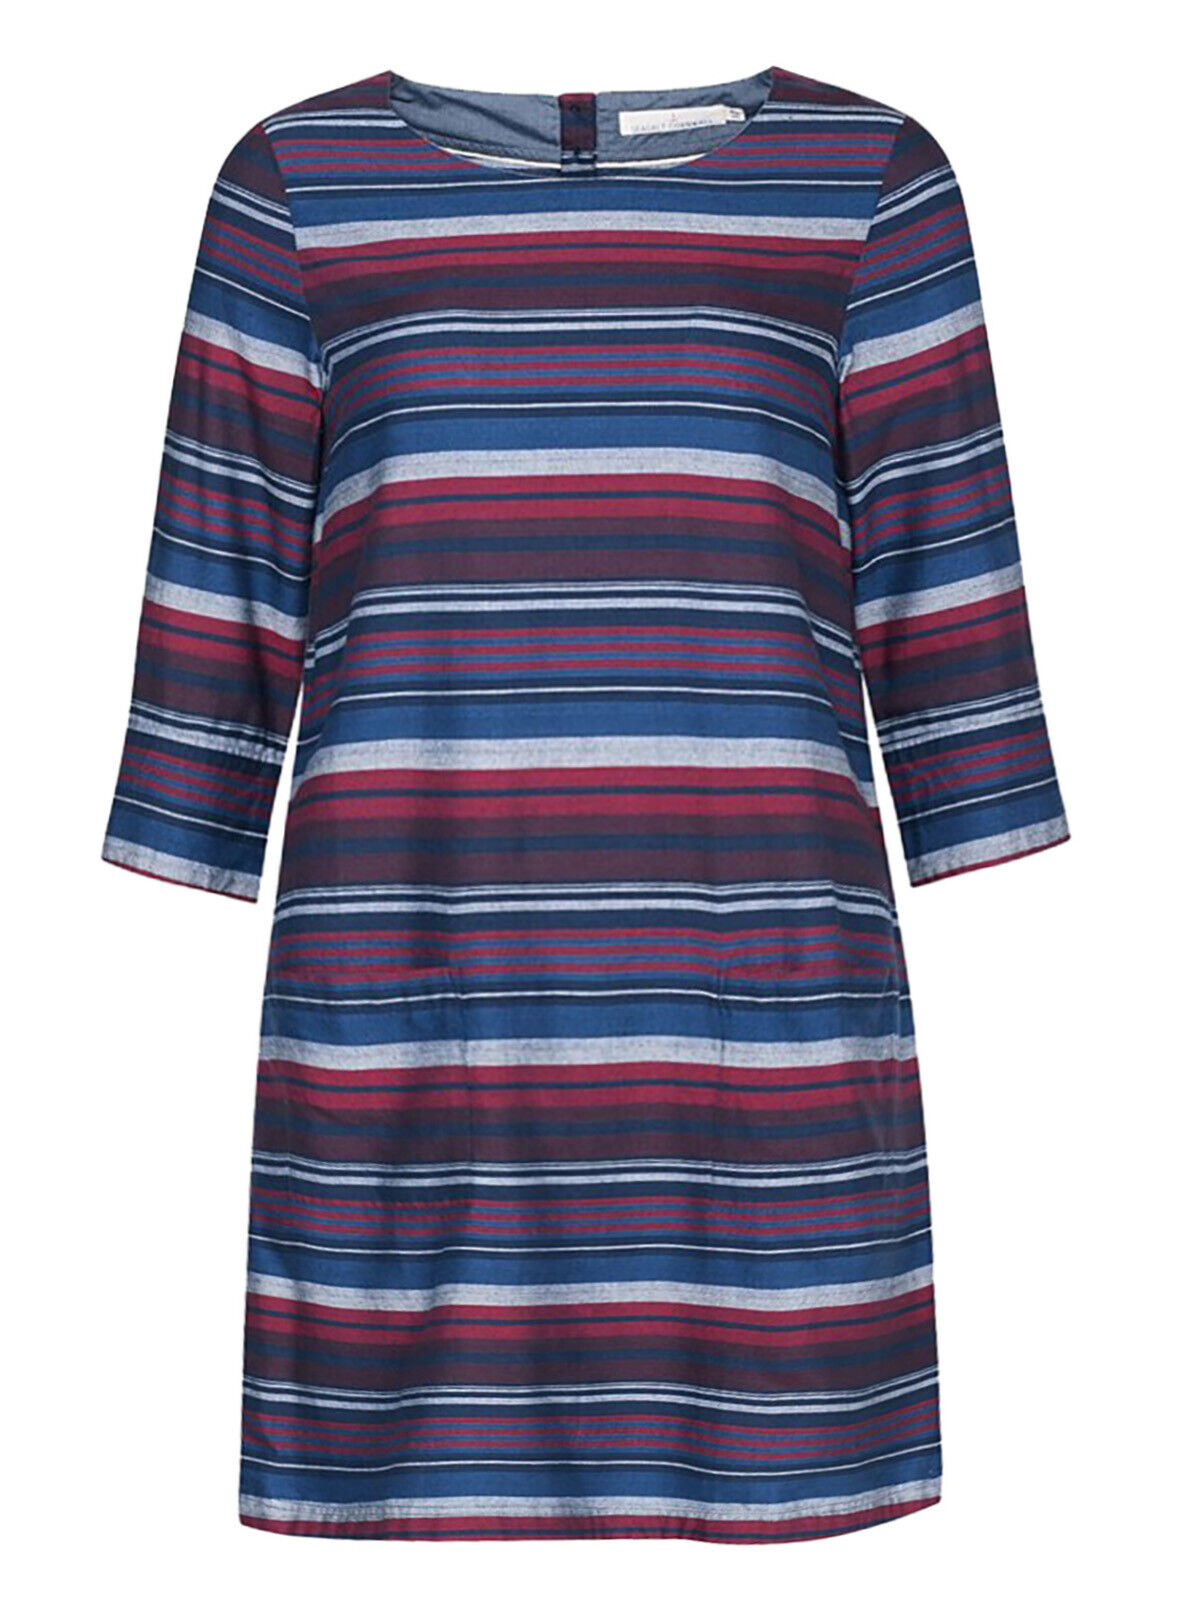 EX Seasalt Folly Cove Dress, Faraway Voyage Rosewood in Size 10 RRP £64.95